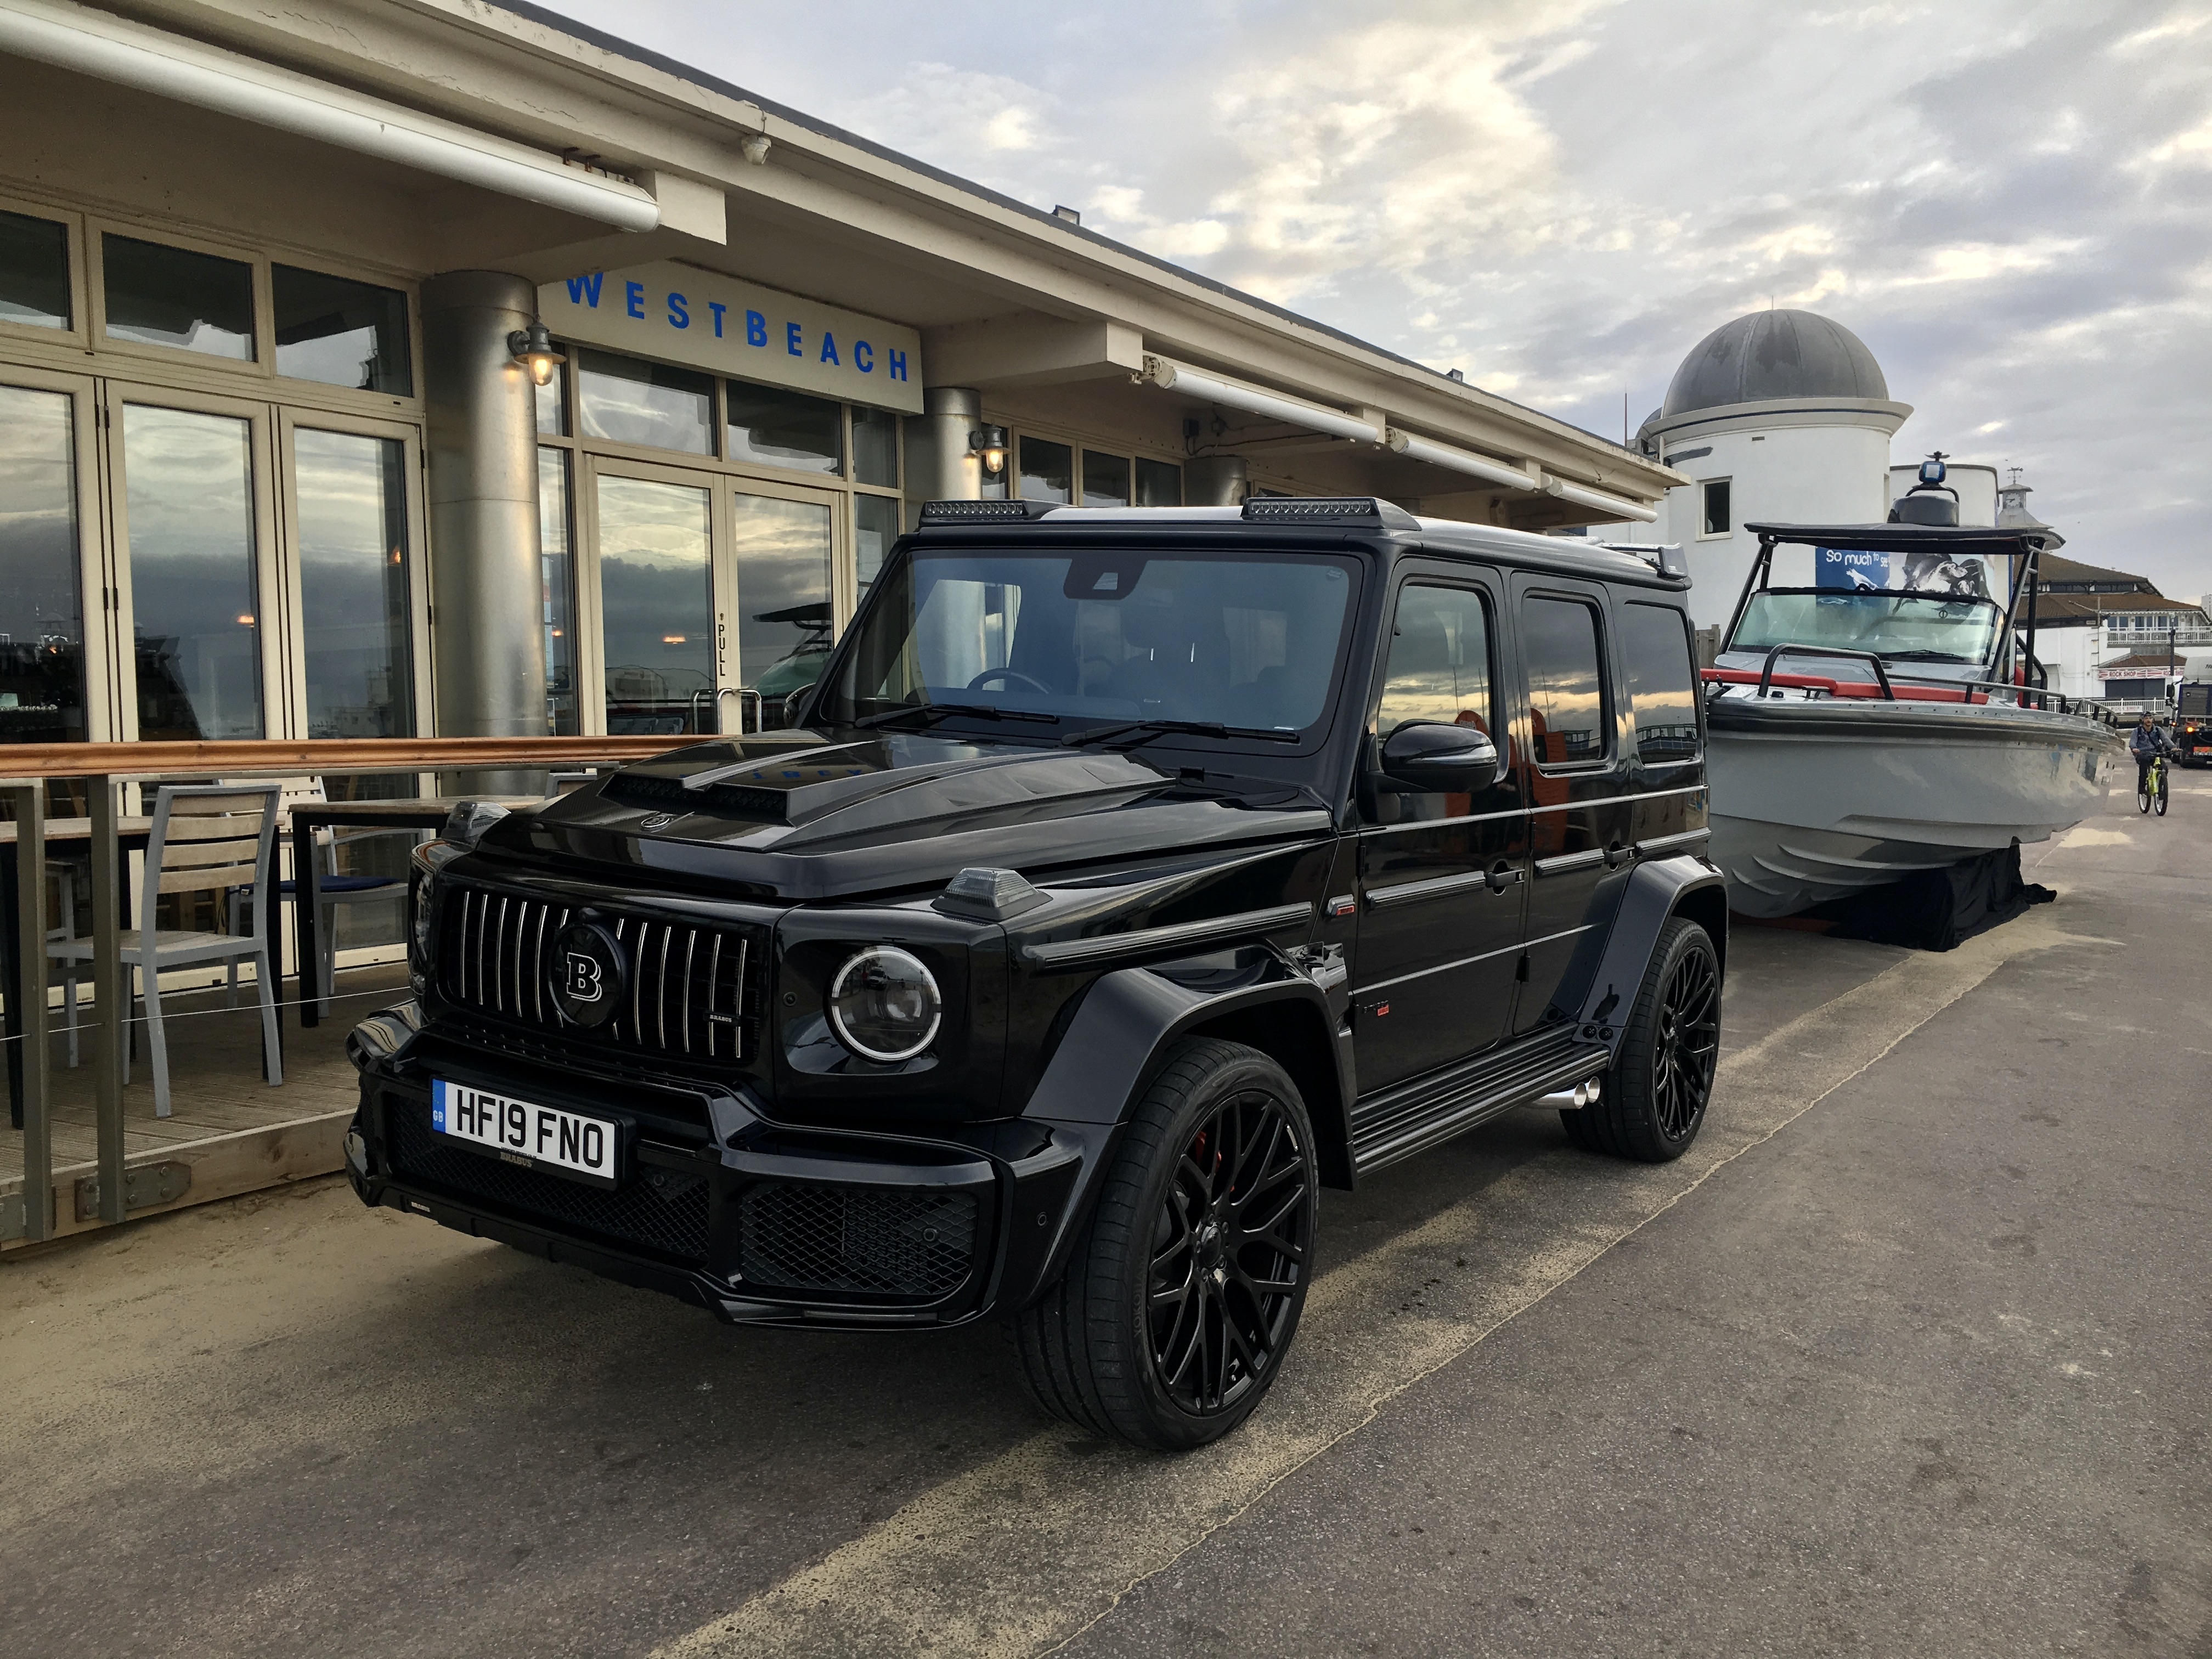 Brabus WestBeach with Boat